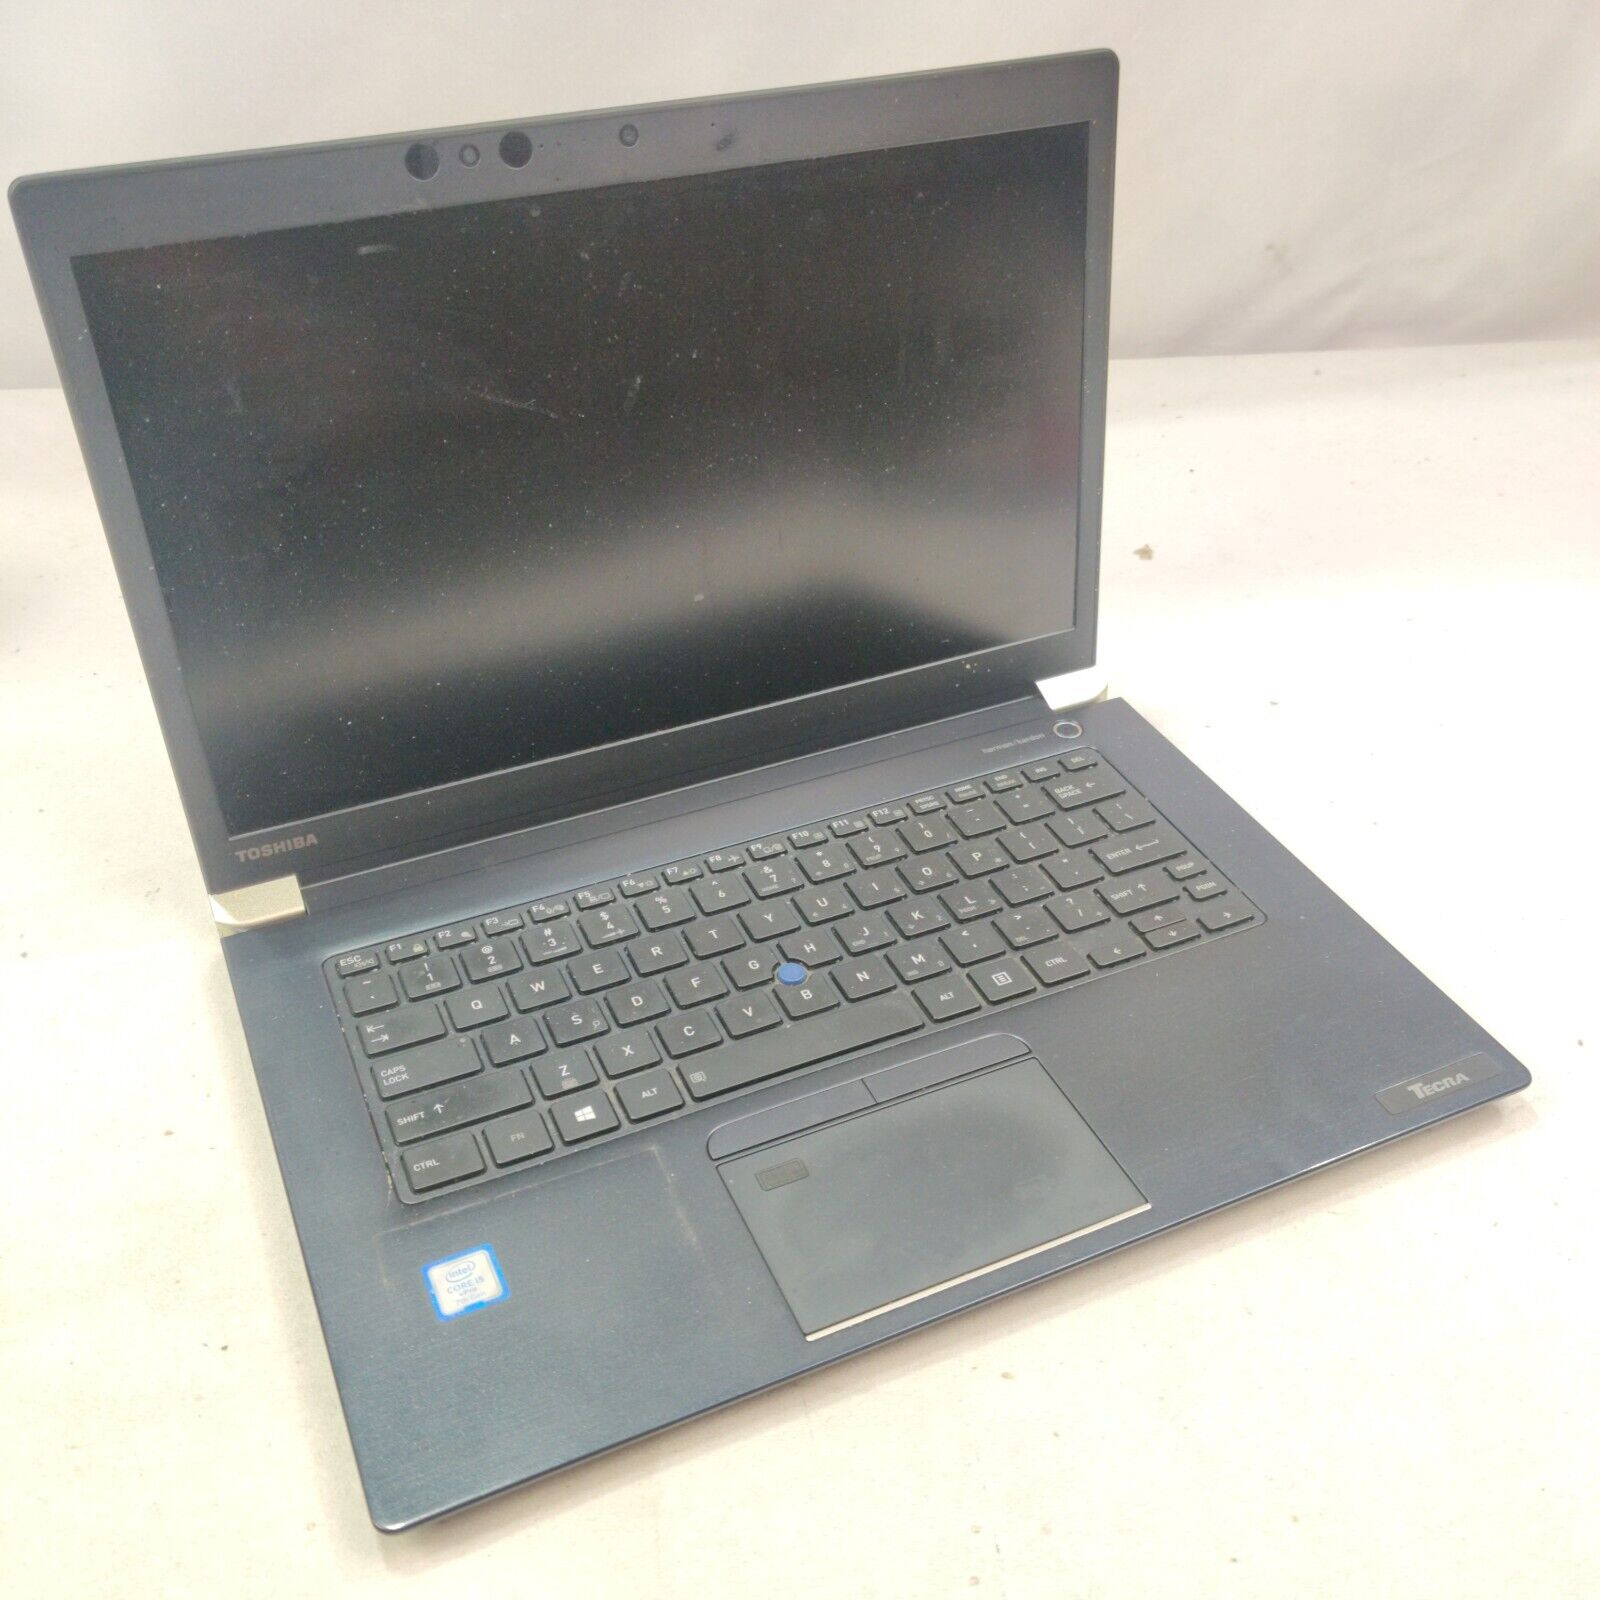 Toshiba Tecra X40-D i5 7th Gen NO RAM NO HDD DOESN'T POWER ON - FOR PARTS/REPAIR